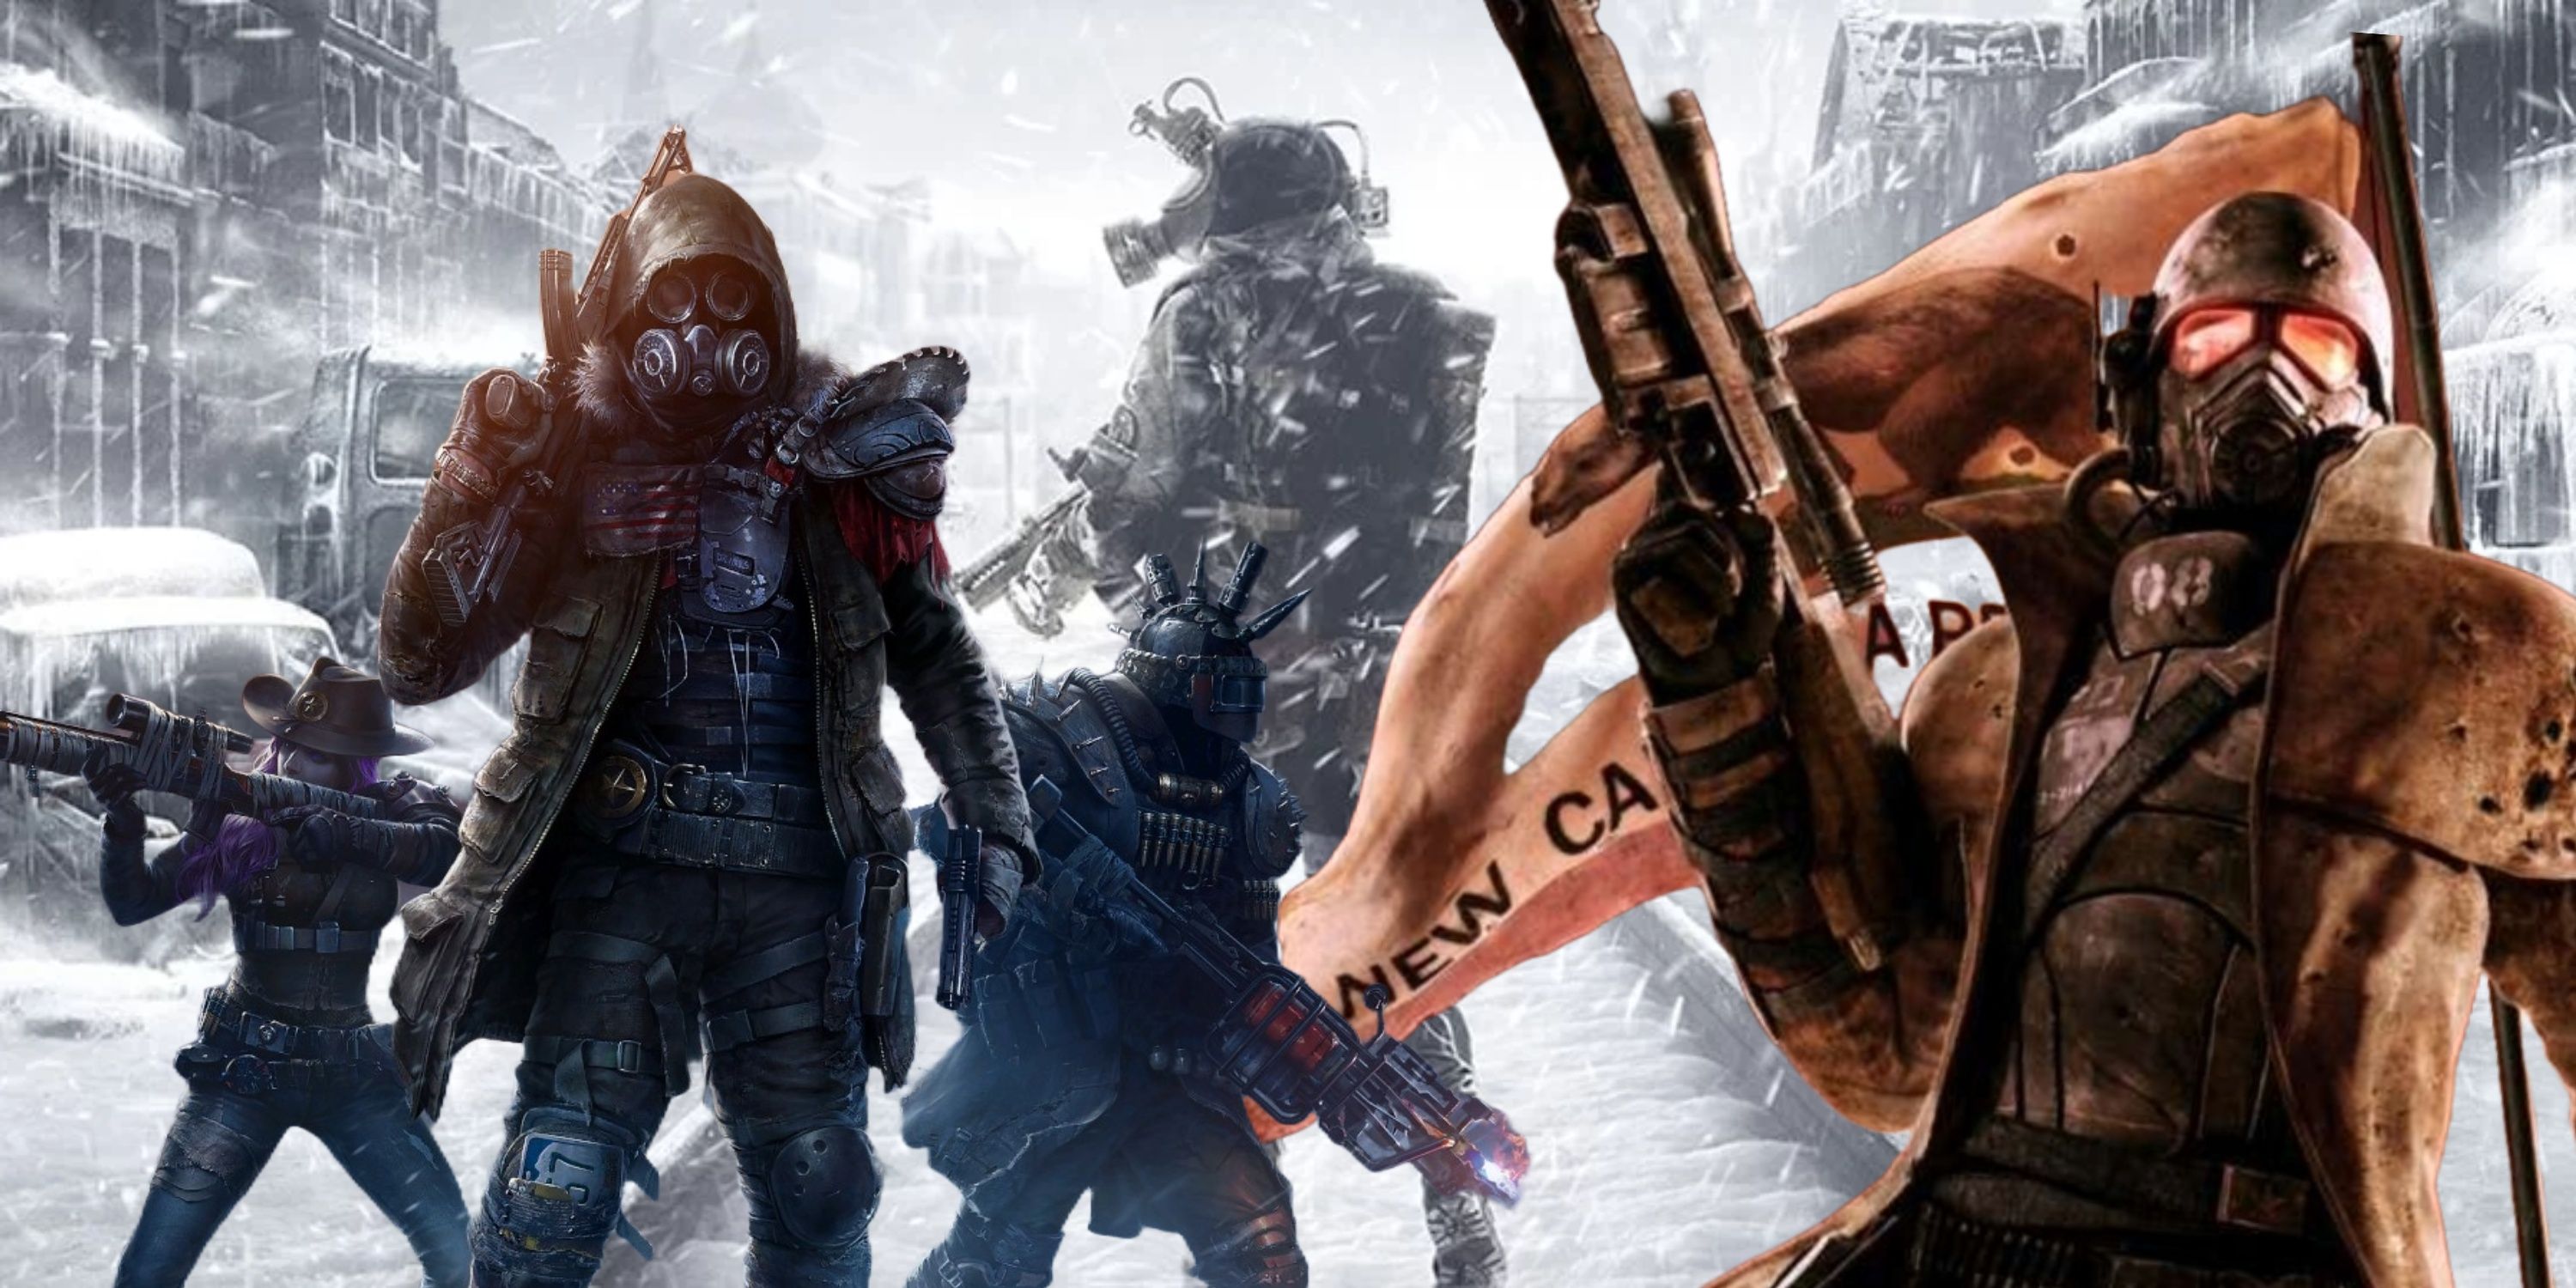 Post-Apocalyptic Games Without Zombies (Featured Image) - Wasteland 3 + Fallout: New Vegas + Metro Exodus